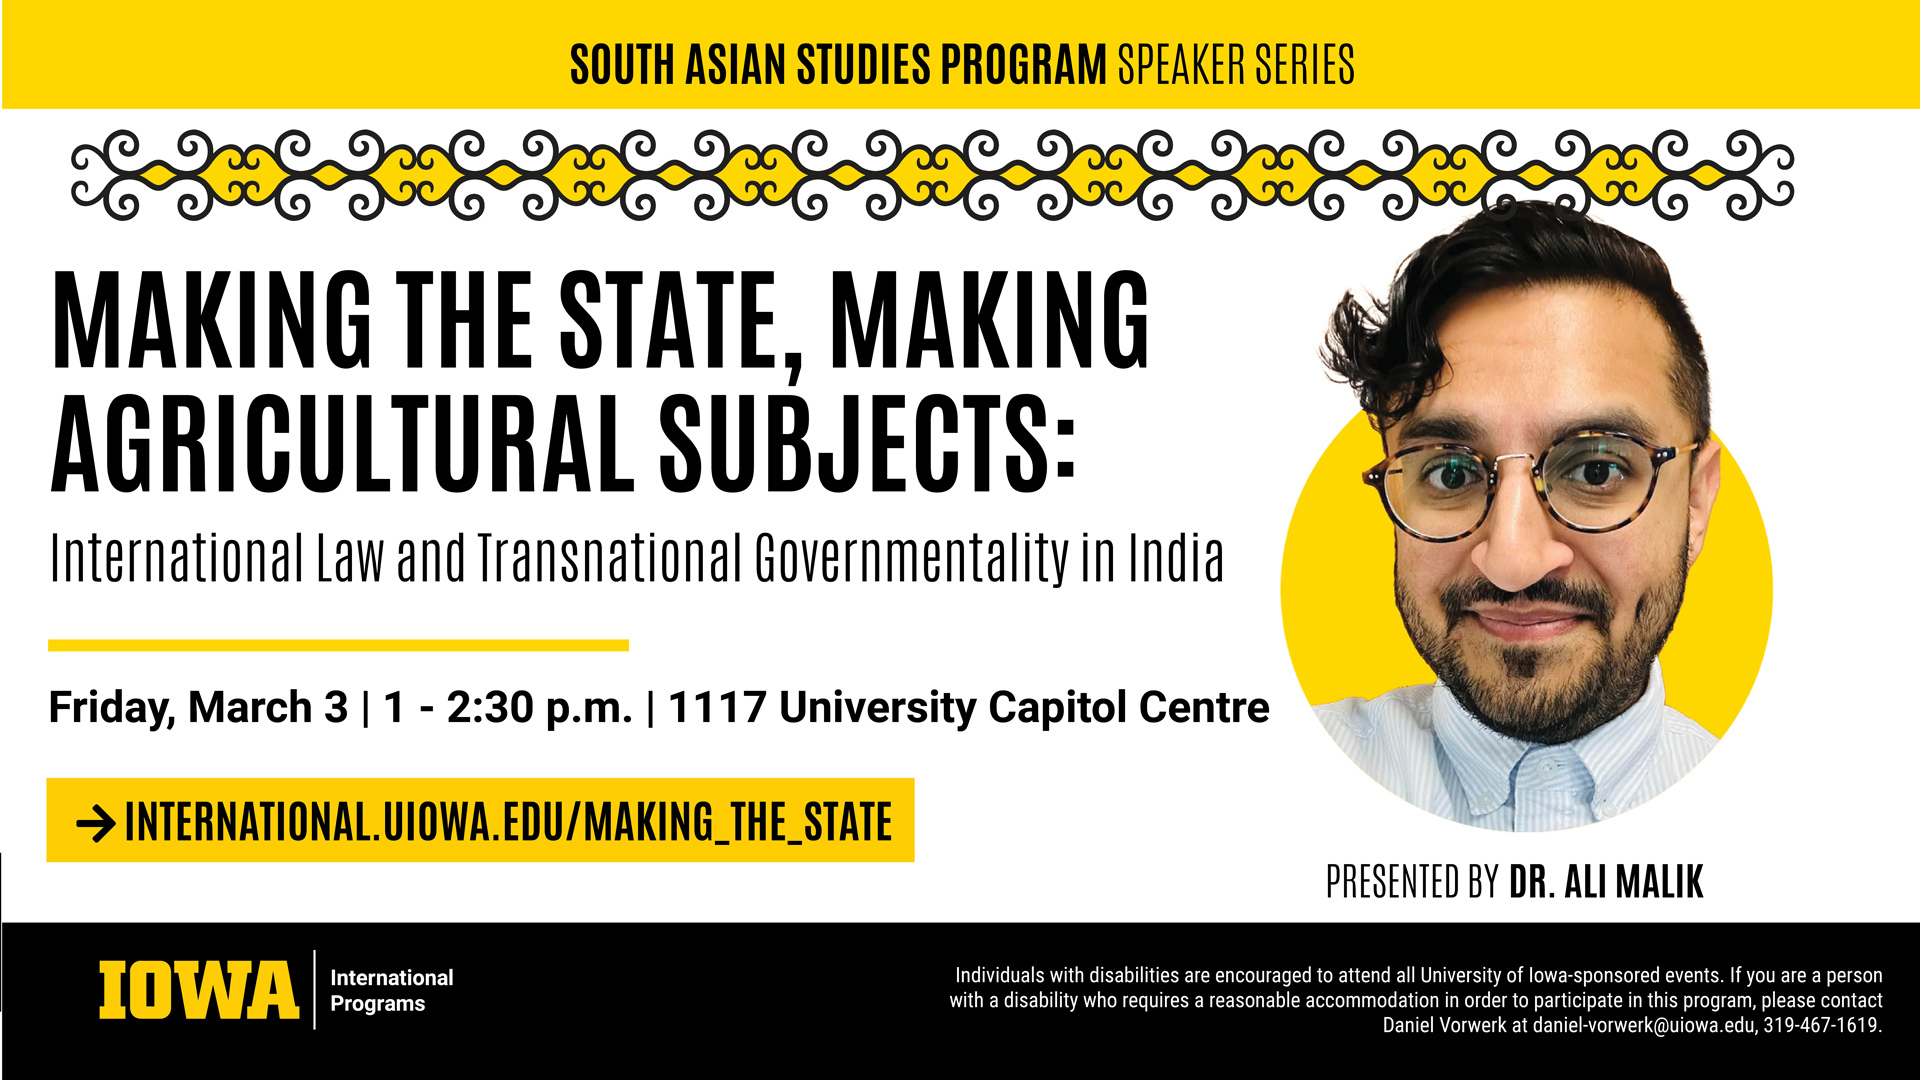 The South Asian Studies Program and the UI Department of Geographical and Sustainability Sciences invite you to "Making the State, Making Agricultural Subjects: International Law and Transnational Governmentality in India," a talk by Dr. Ali Malik, on Friday, March 3, from 1 - 2:30 p.m., in 1117 University Capitol Centre.